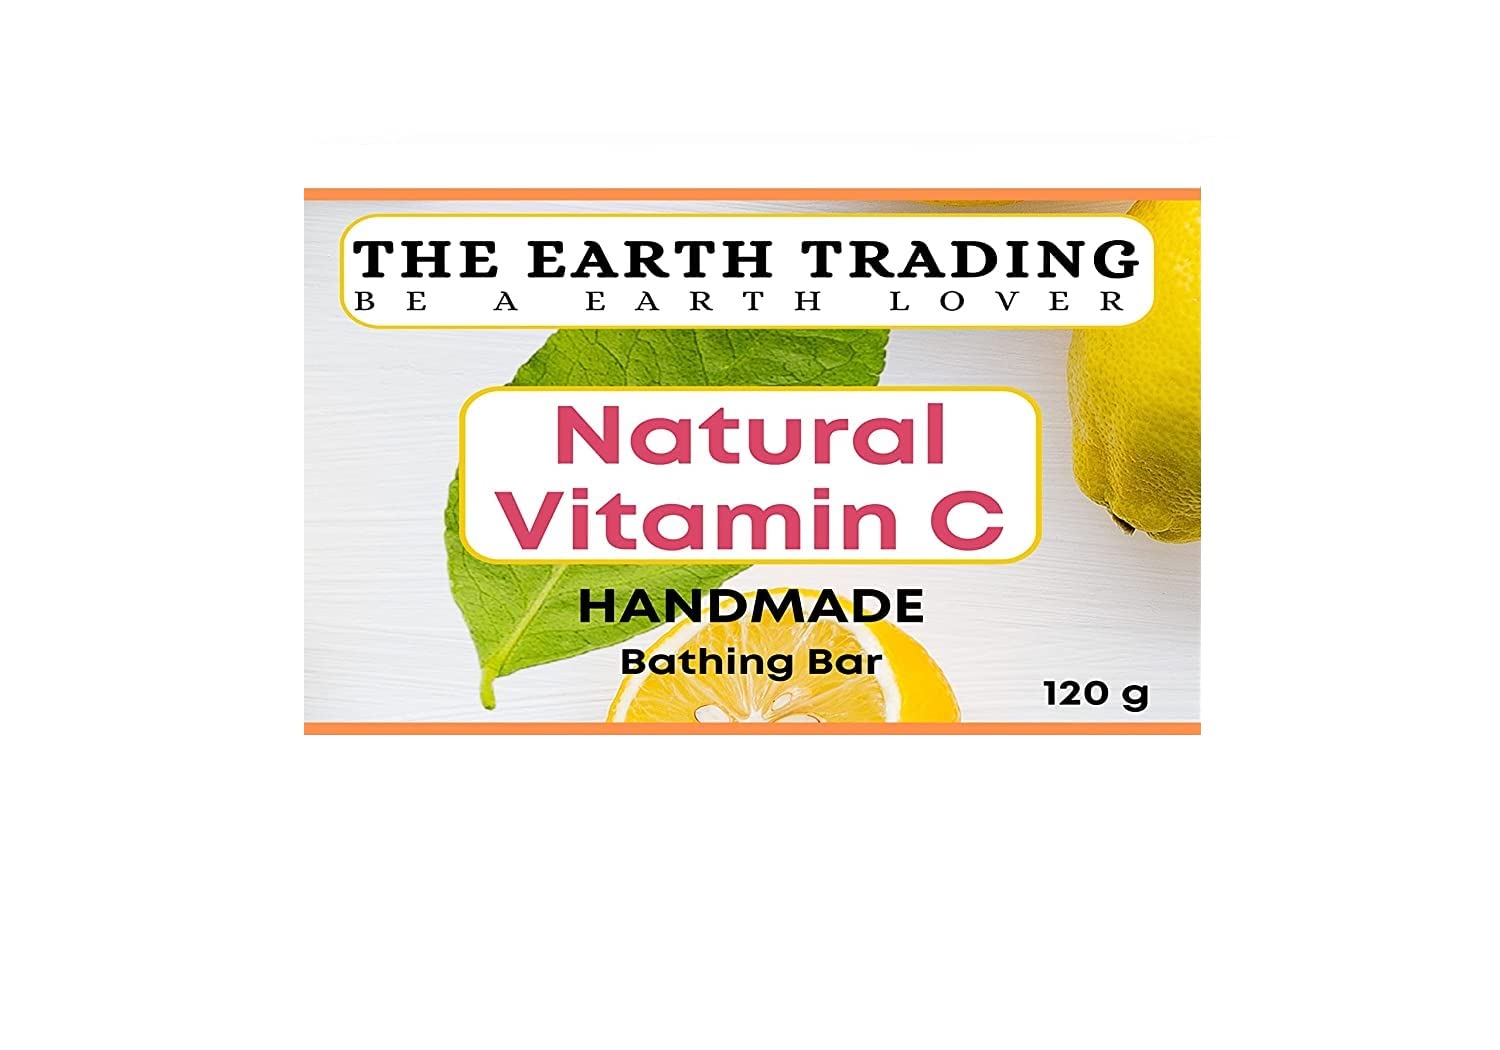 The Earth Trading Handmade Natural Vitamin C Soap for Bath - 120g (Pack of 1)